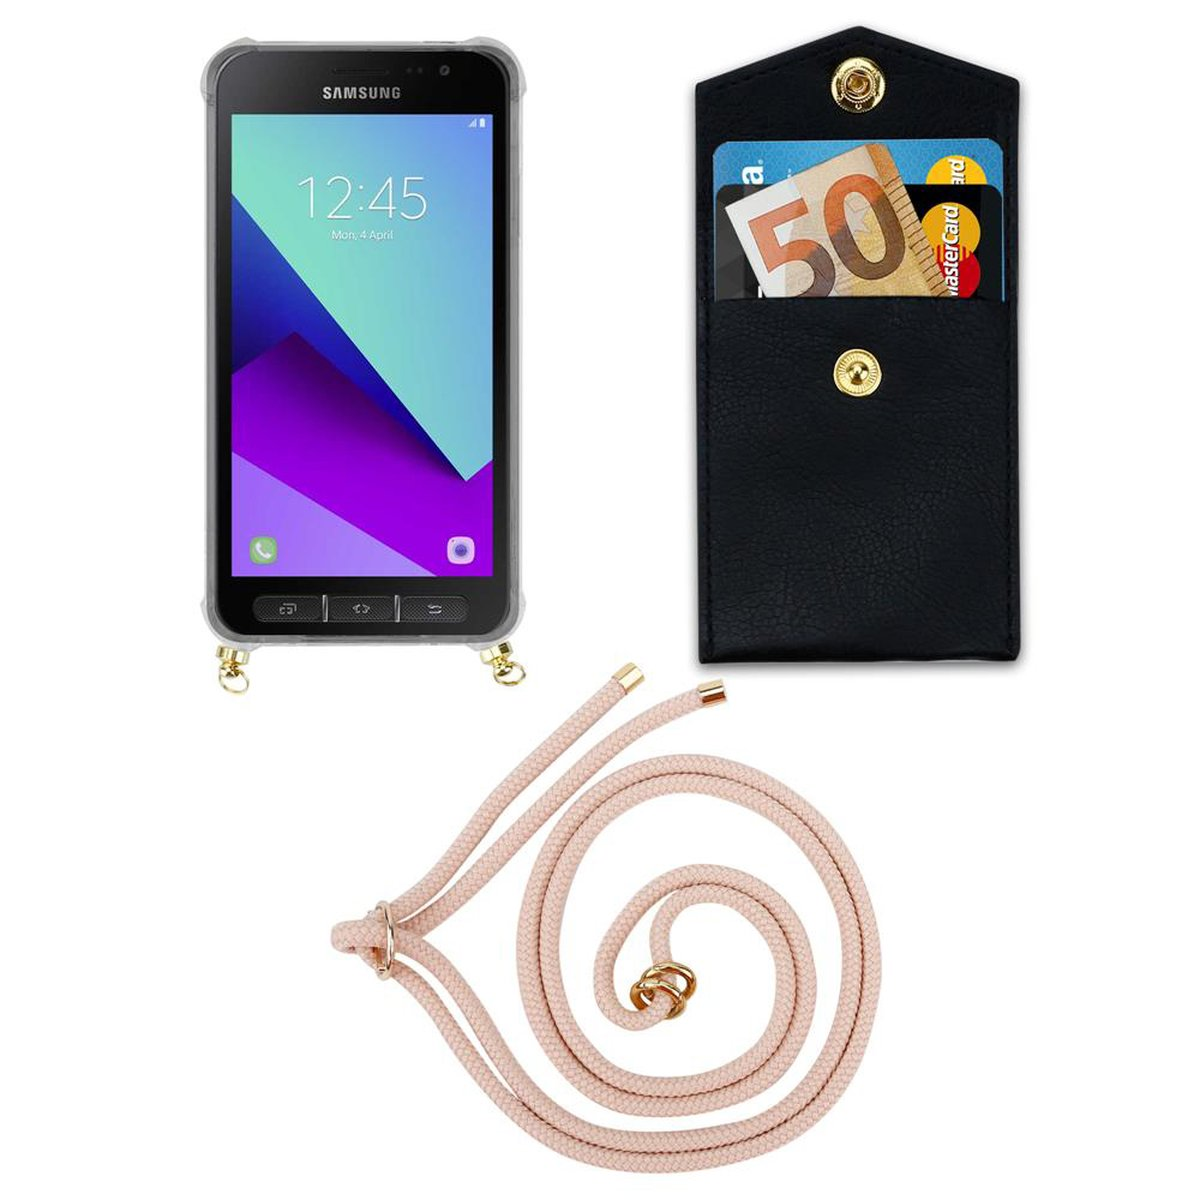 Band Handy Backcover, CADORABO 4 und XCover Gold / Galaxy ROSÉGOLD 4s, Ringen, abnehmbarer mit Samsung, Kette Kordel Hülle, XCover PERLIG